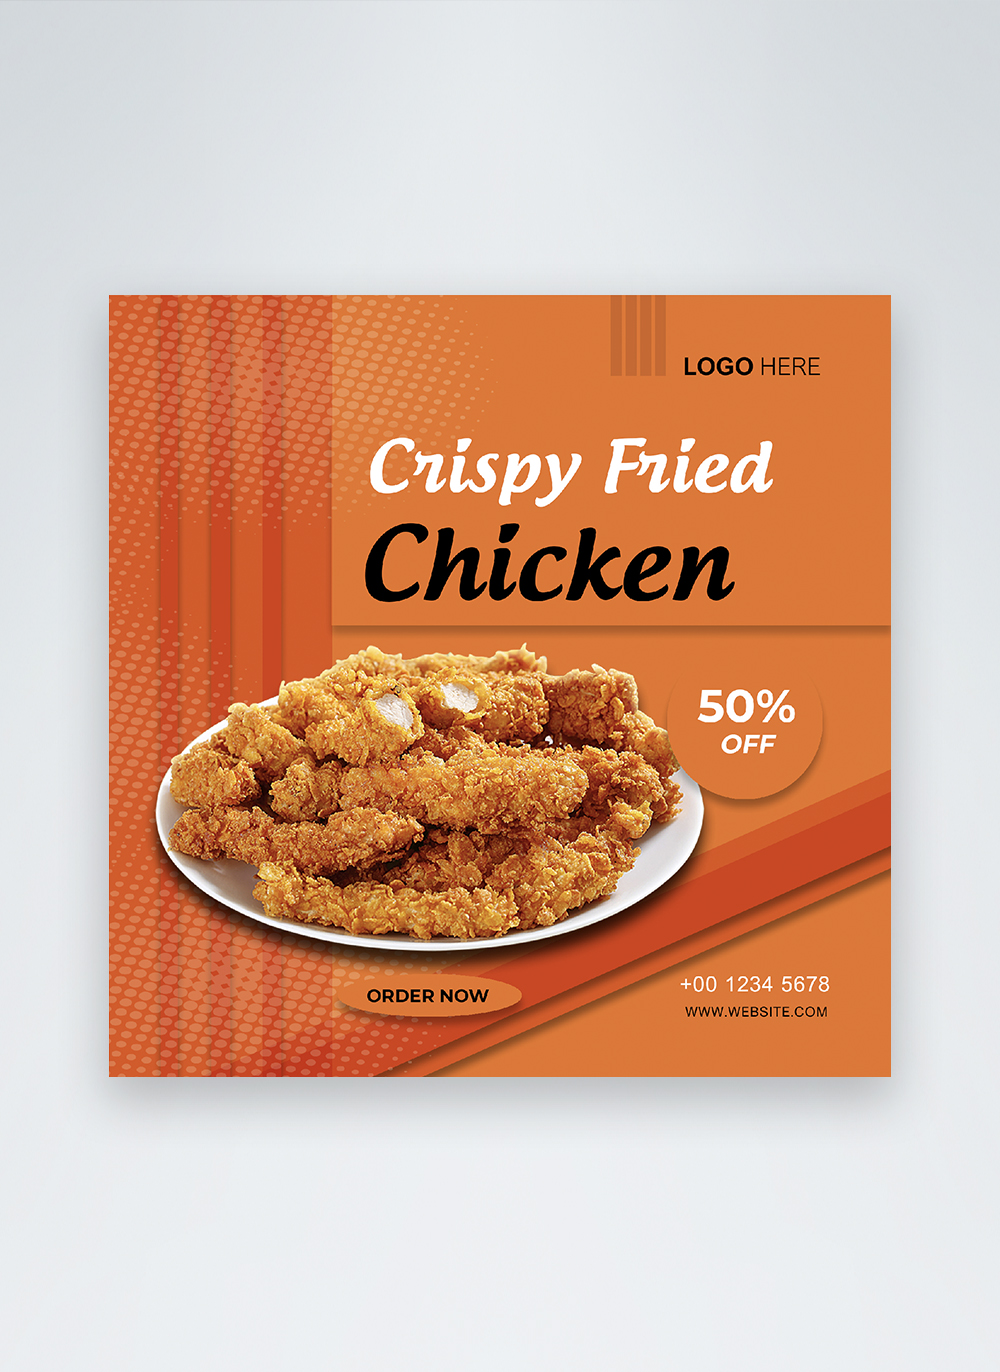 Download Crispy Fried Chicken Social Media Post Template Image Picture Free Download 450014808 Lovepik Com